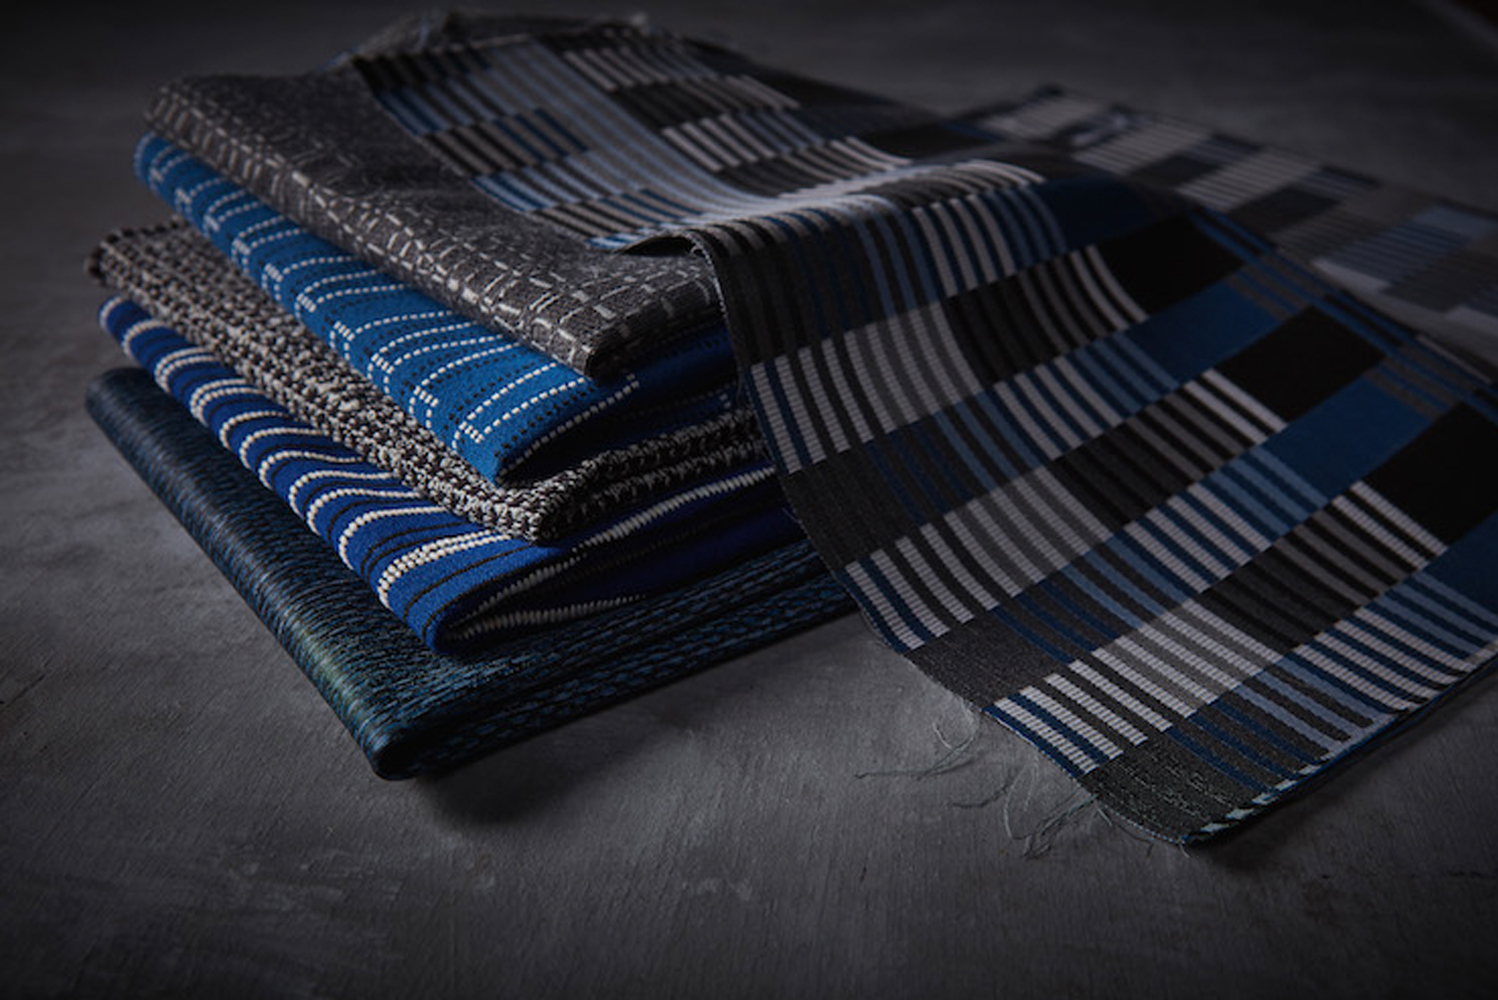 Introducing Minim a new collection of textiles from US-based Pallas Textiles 